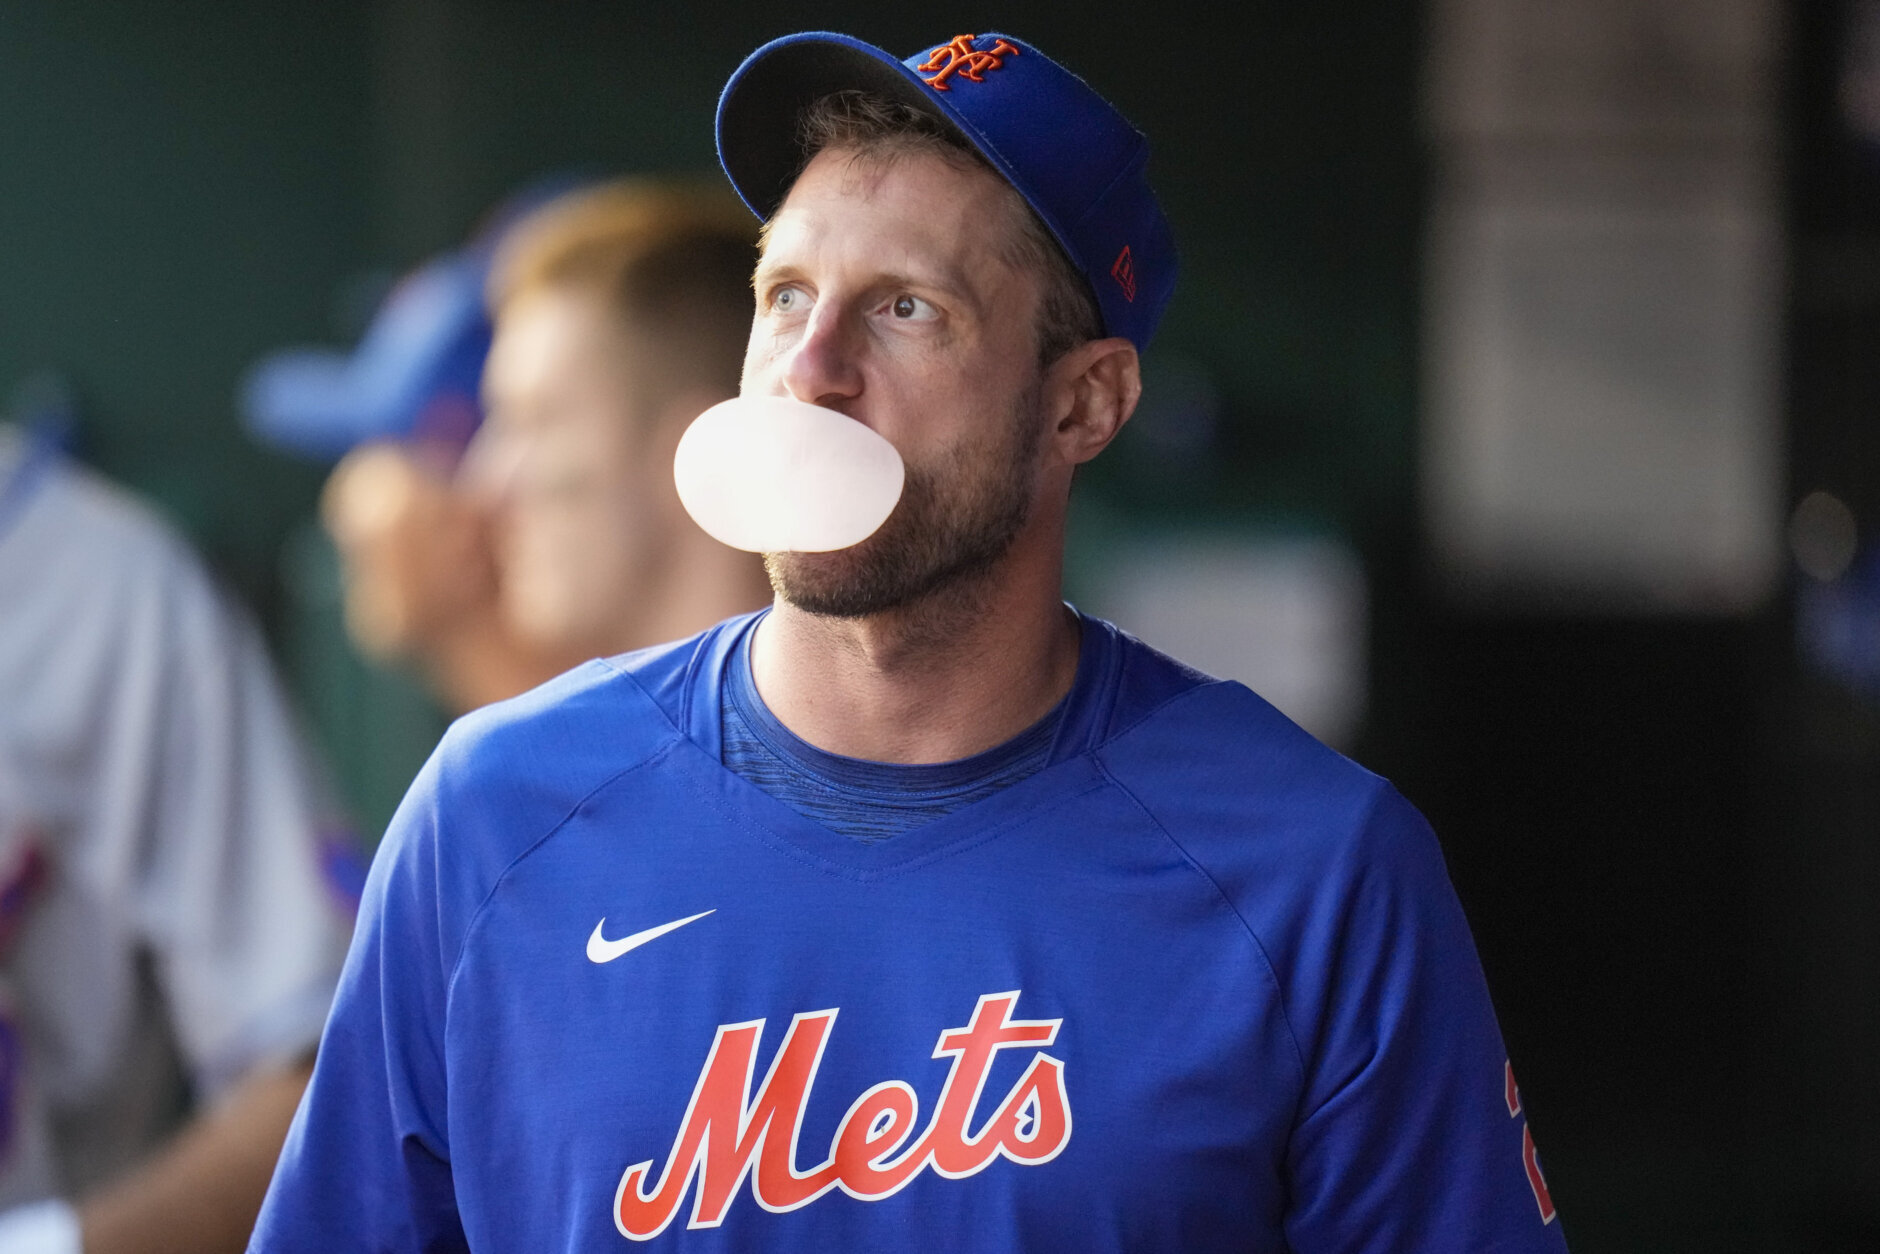 New York Mets starting pitcher Max Scherzer blows a bubble in the dugout during the third inning of the team's baseball game against the Washington Nationals at Nationals Park, Friday, May 12, 2023, in Washington. (AP Photo/Alex Brandon)